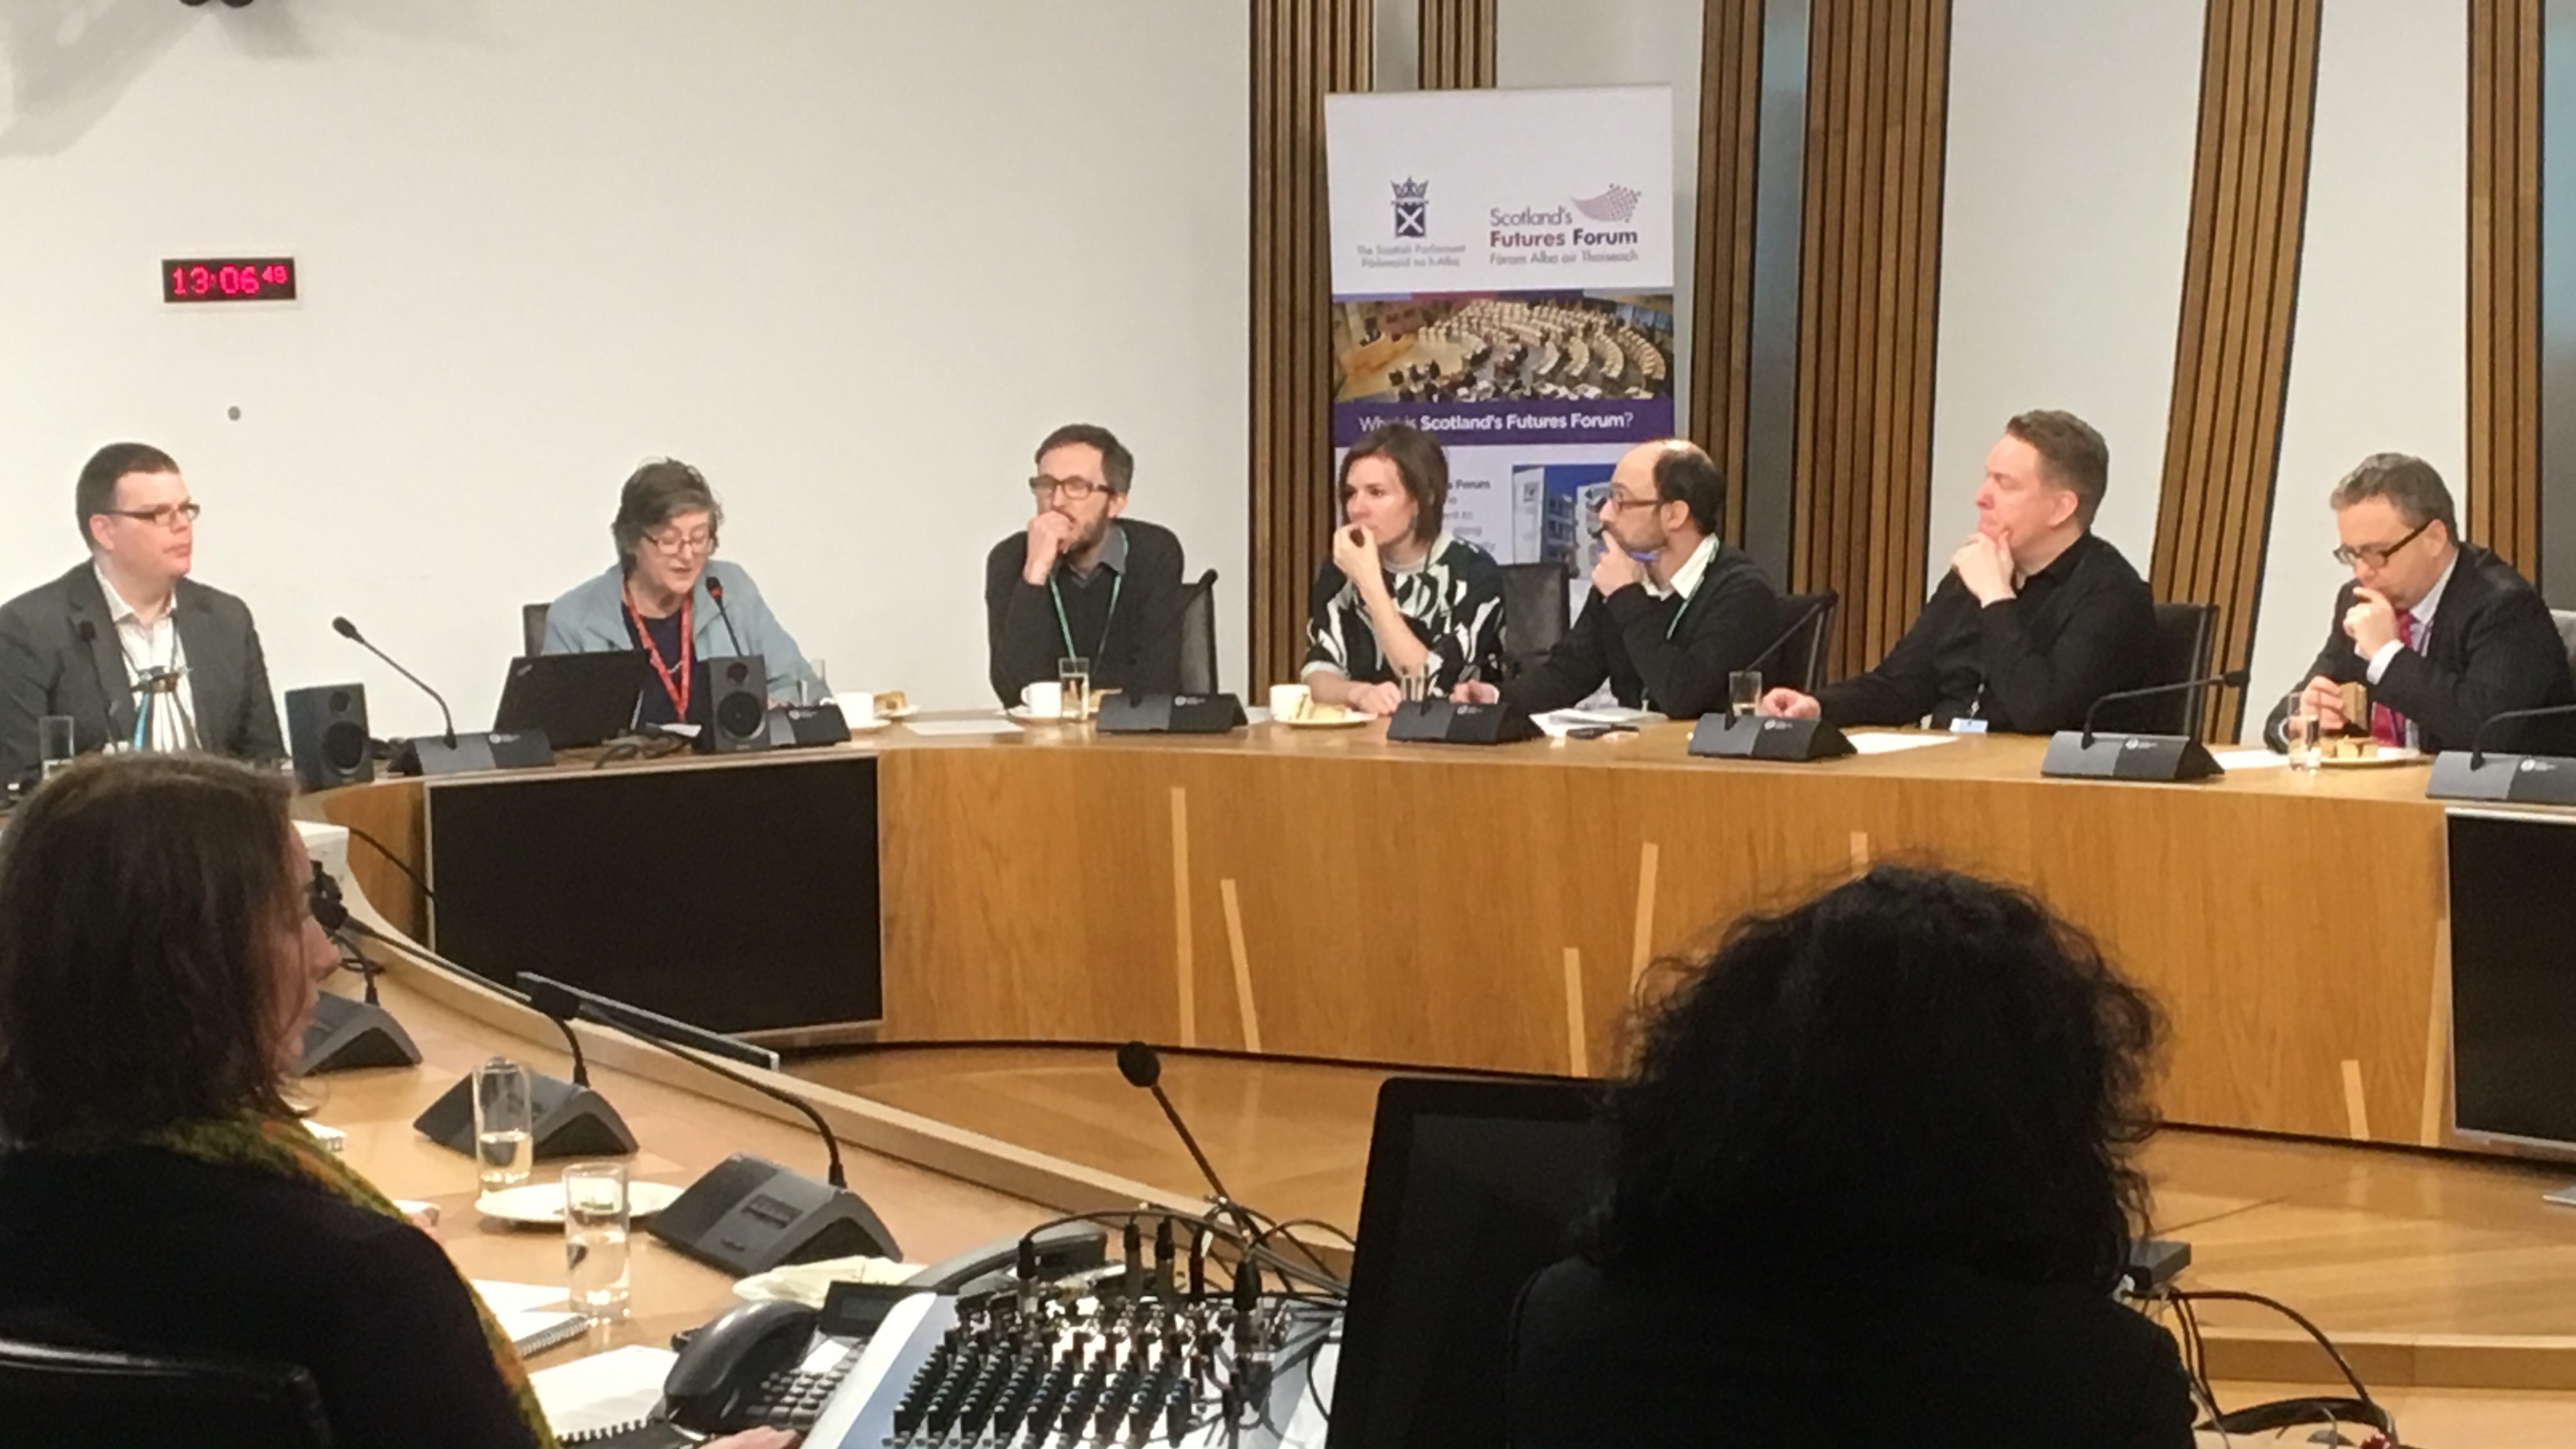 Digital Democracy: Opportunities and Challenges for Scotland